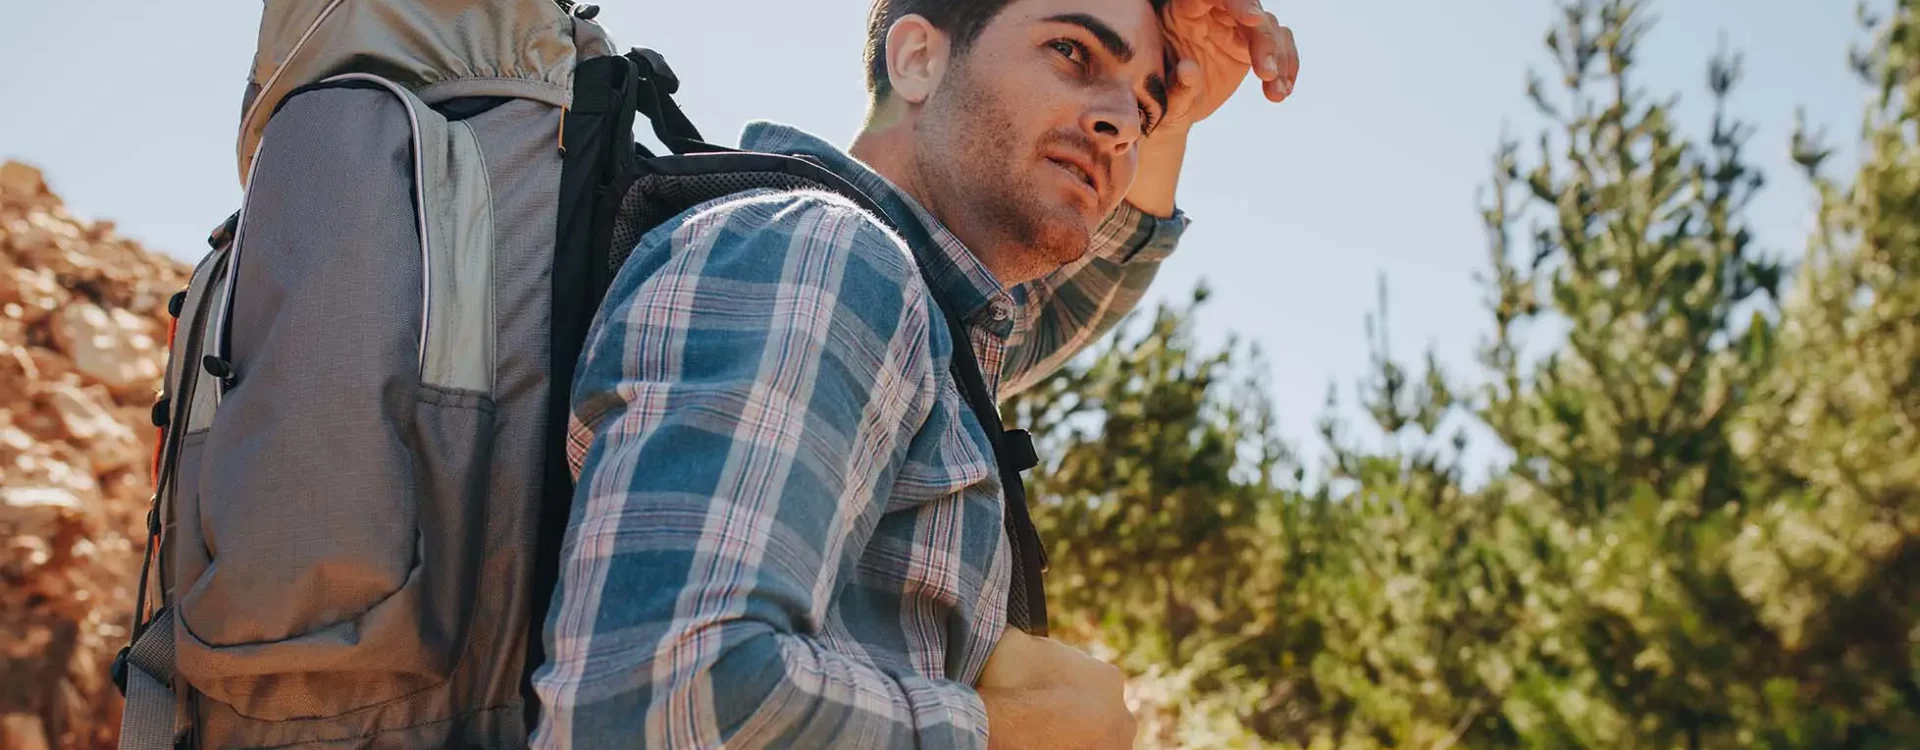 Man outdoors hiking with a backpack